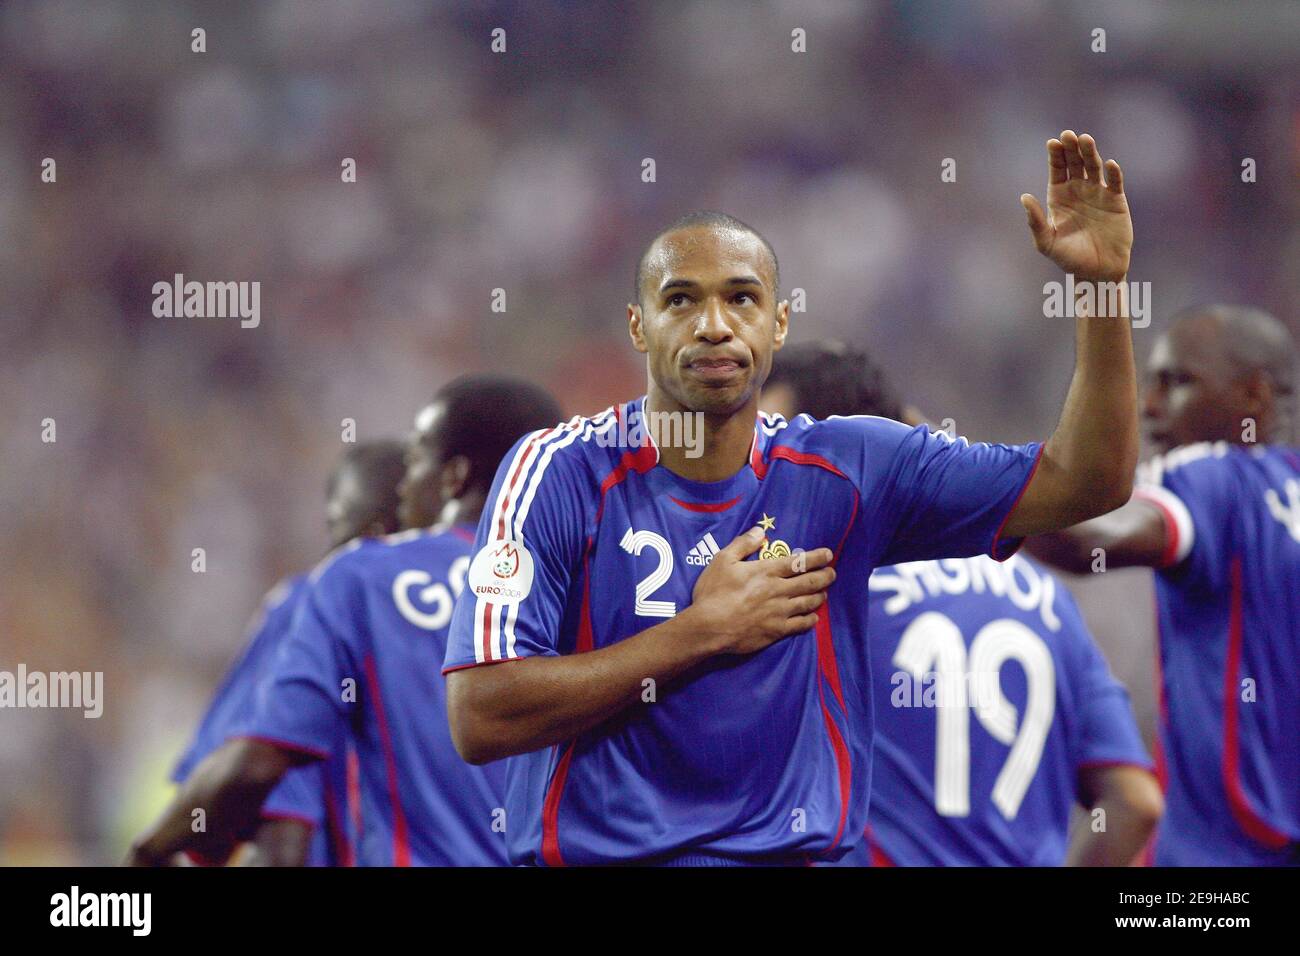 Former Arsenal and France striker Thierry Henry has announced his  retirement from football after a trophy-laden 20-year career to take up a  media role. The 1998 World Cup winner, 37, left New